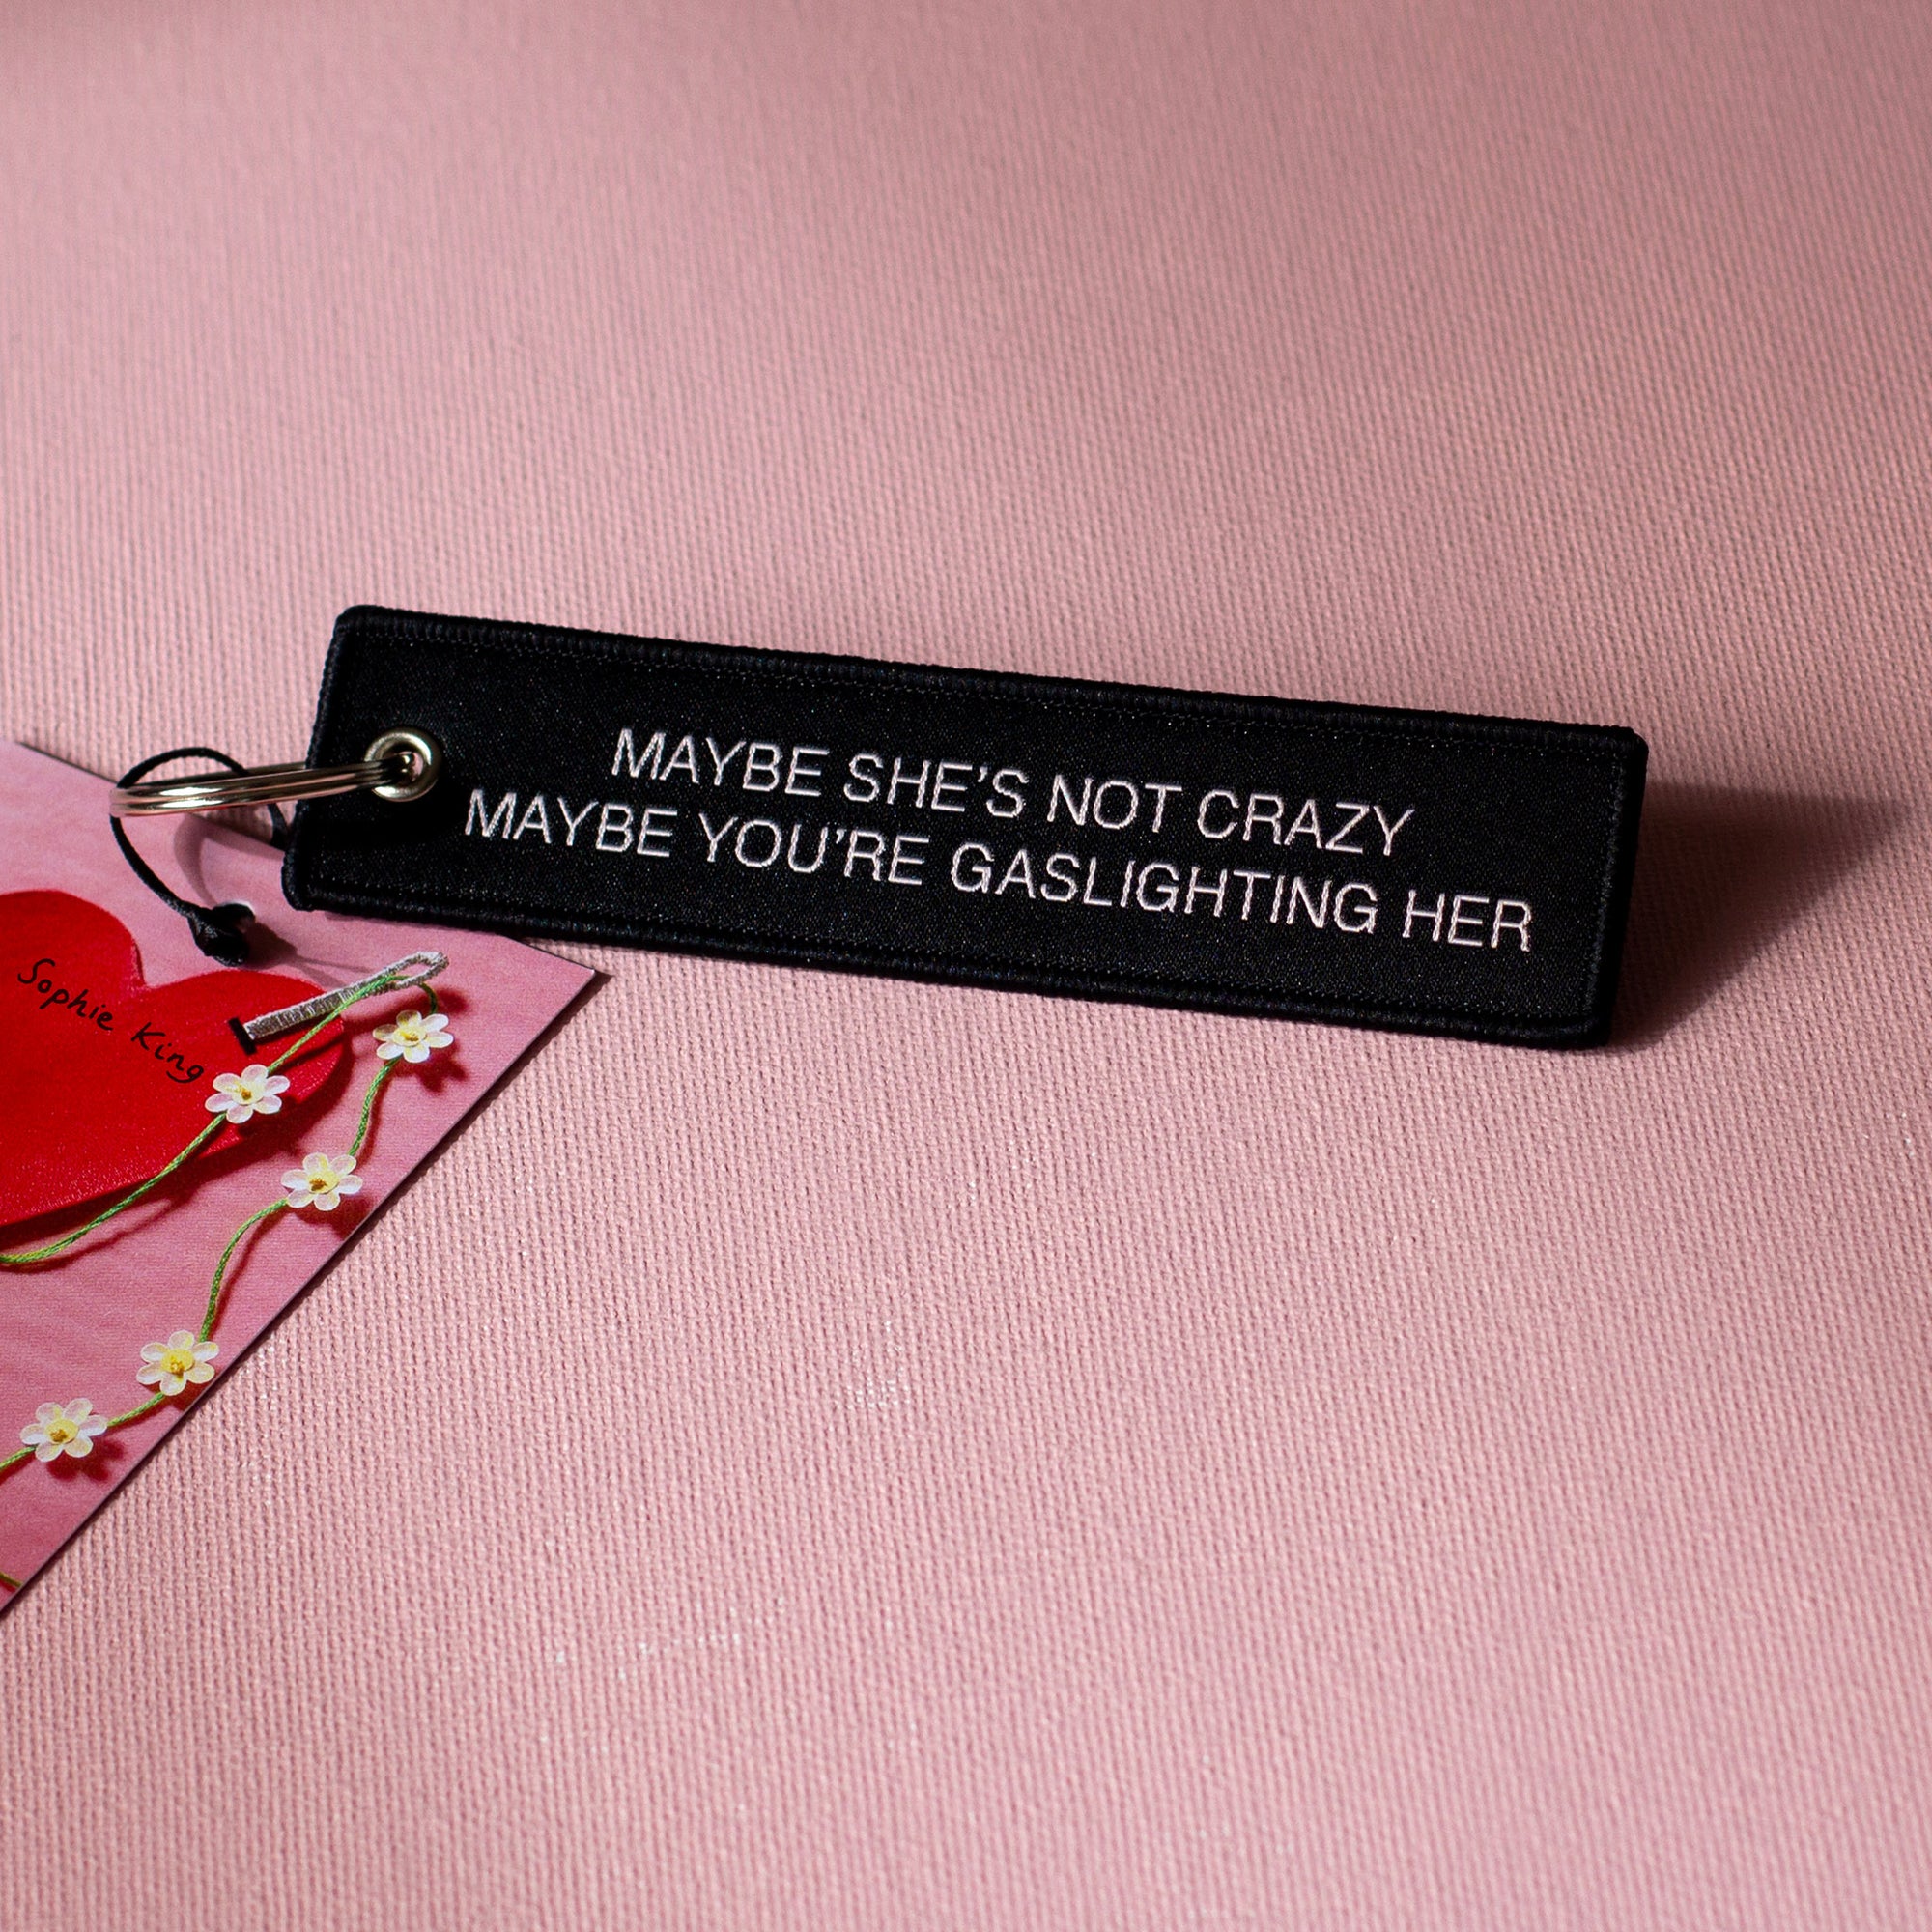 MAYBE SHE'S NOT CRAZY (WOVEN KEYRING)